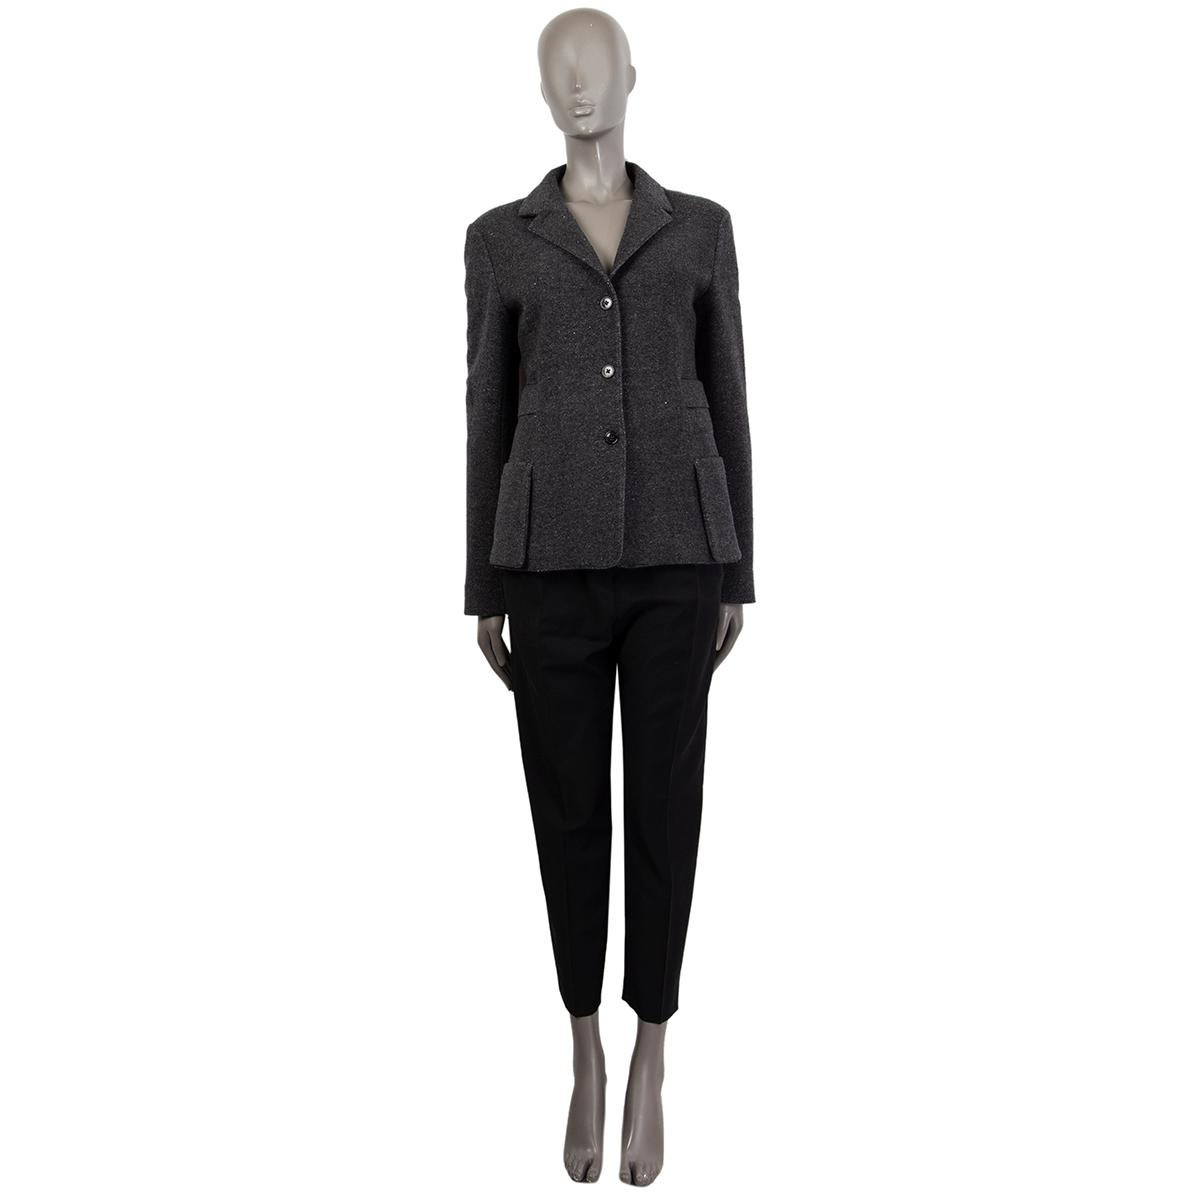 100% authentic Jil Sander buttoned notched collar blazer jacket in grey melange wool (70%) and cashmere (30%). Lined in black polyester (65%) and silk (35%). 2 front patch pockets and waist belt detail around the back. Has been worn and is in